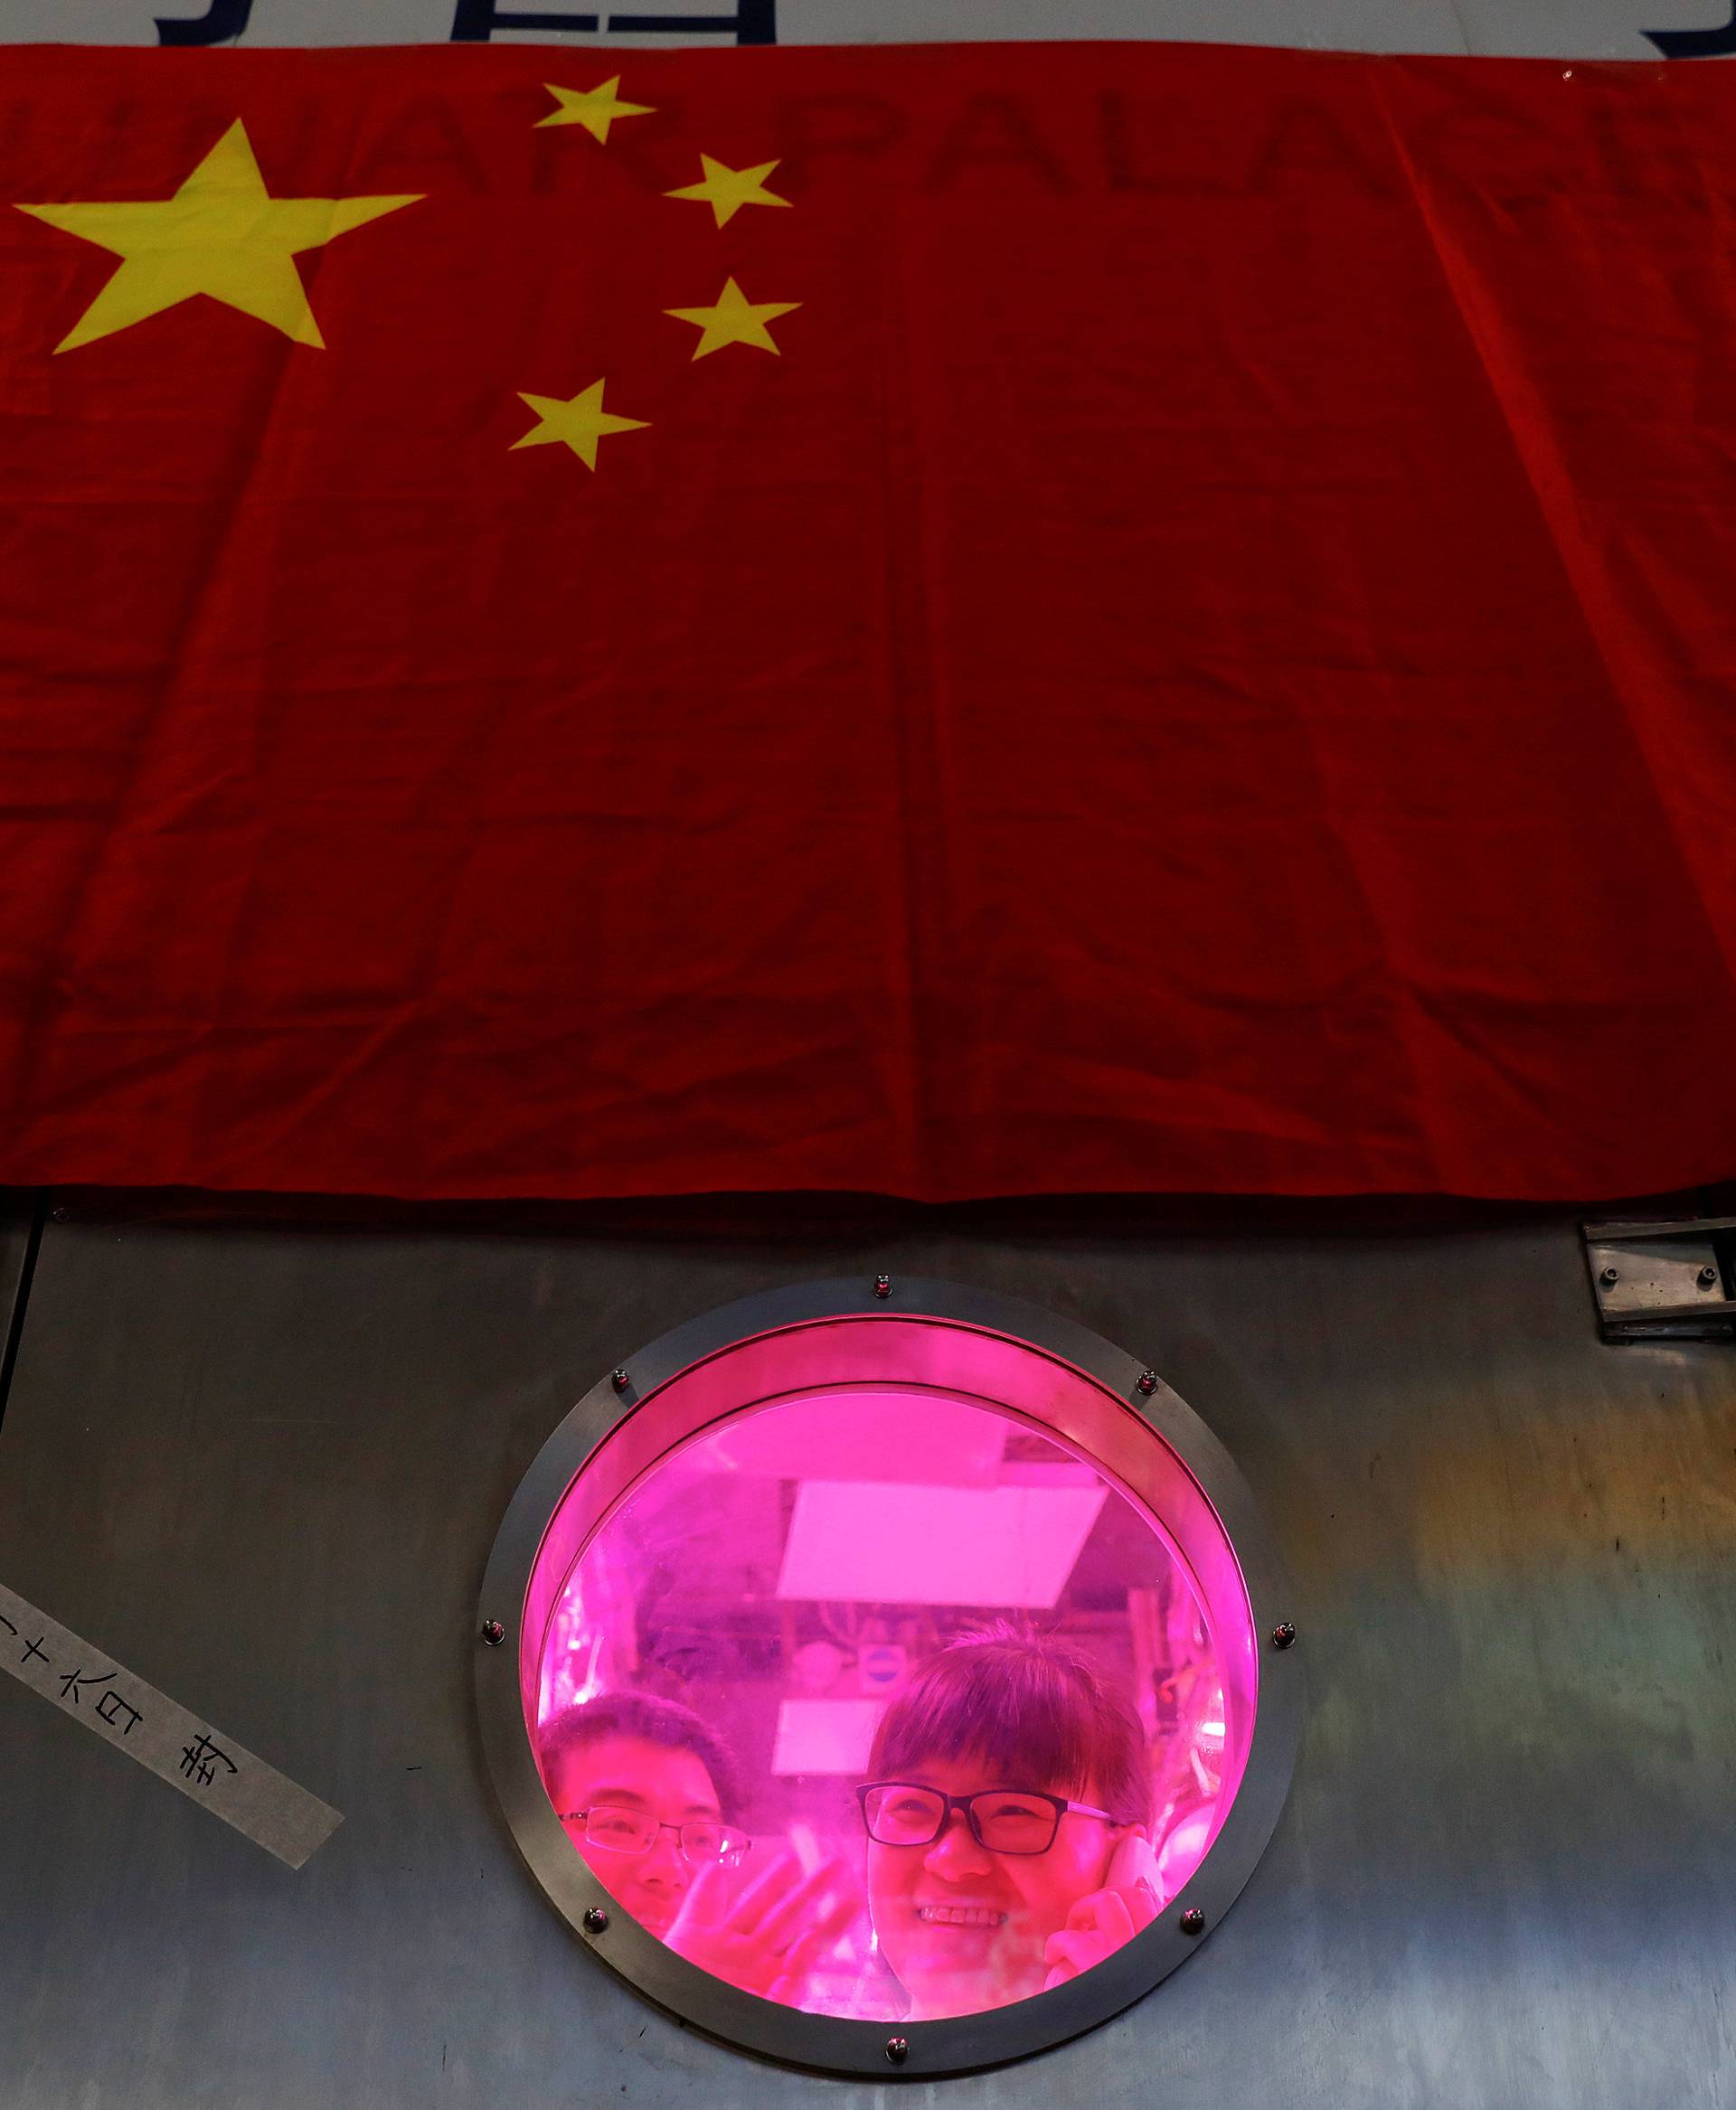 A volunteer waves to a member of staff from inside a simulated space cabin in which she temporarily lives with others as a part of the scientistic Lunar Palace 365 Project, at Beihang University in Beijing